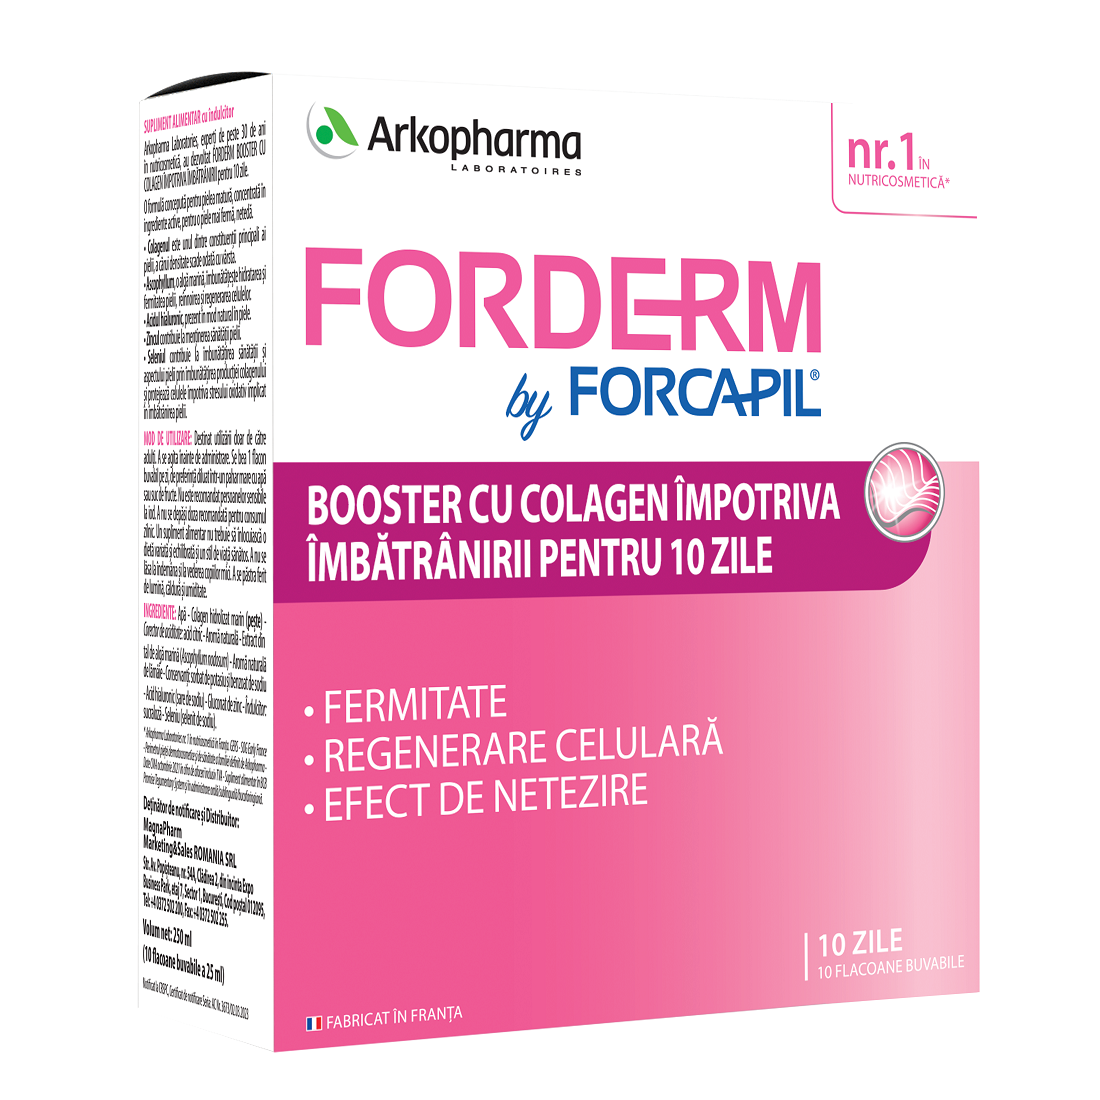 Ingrijire personala - Booster cu colagen Forderm by Forcapil, 10 fiole, Arkopharma, nordpharm.ro